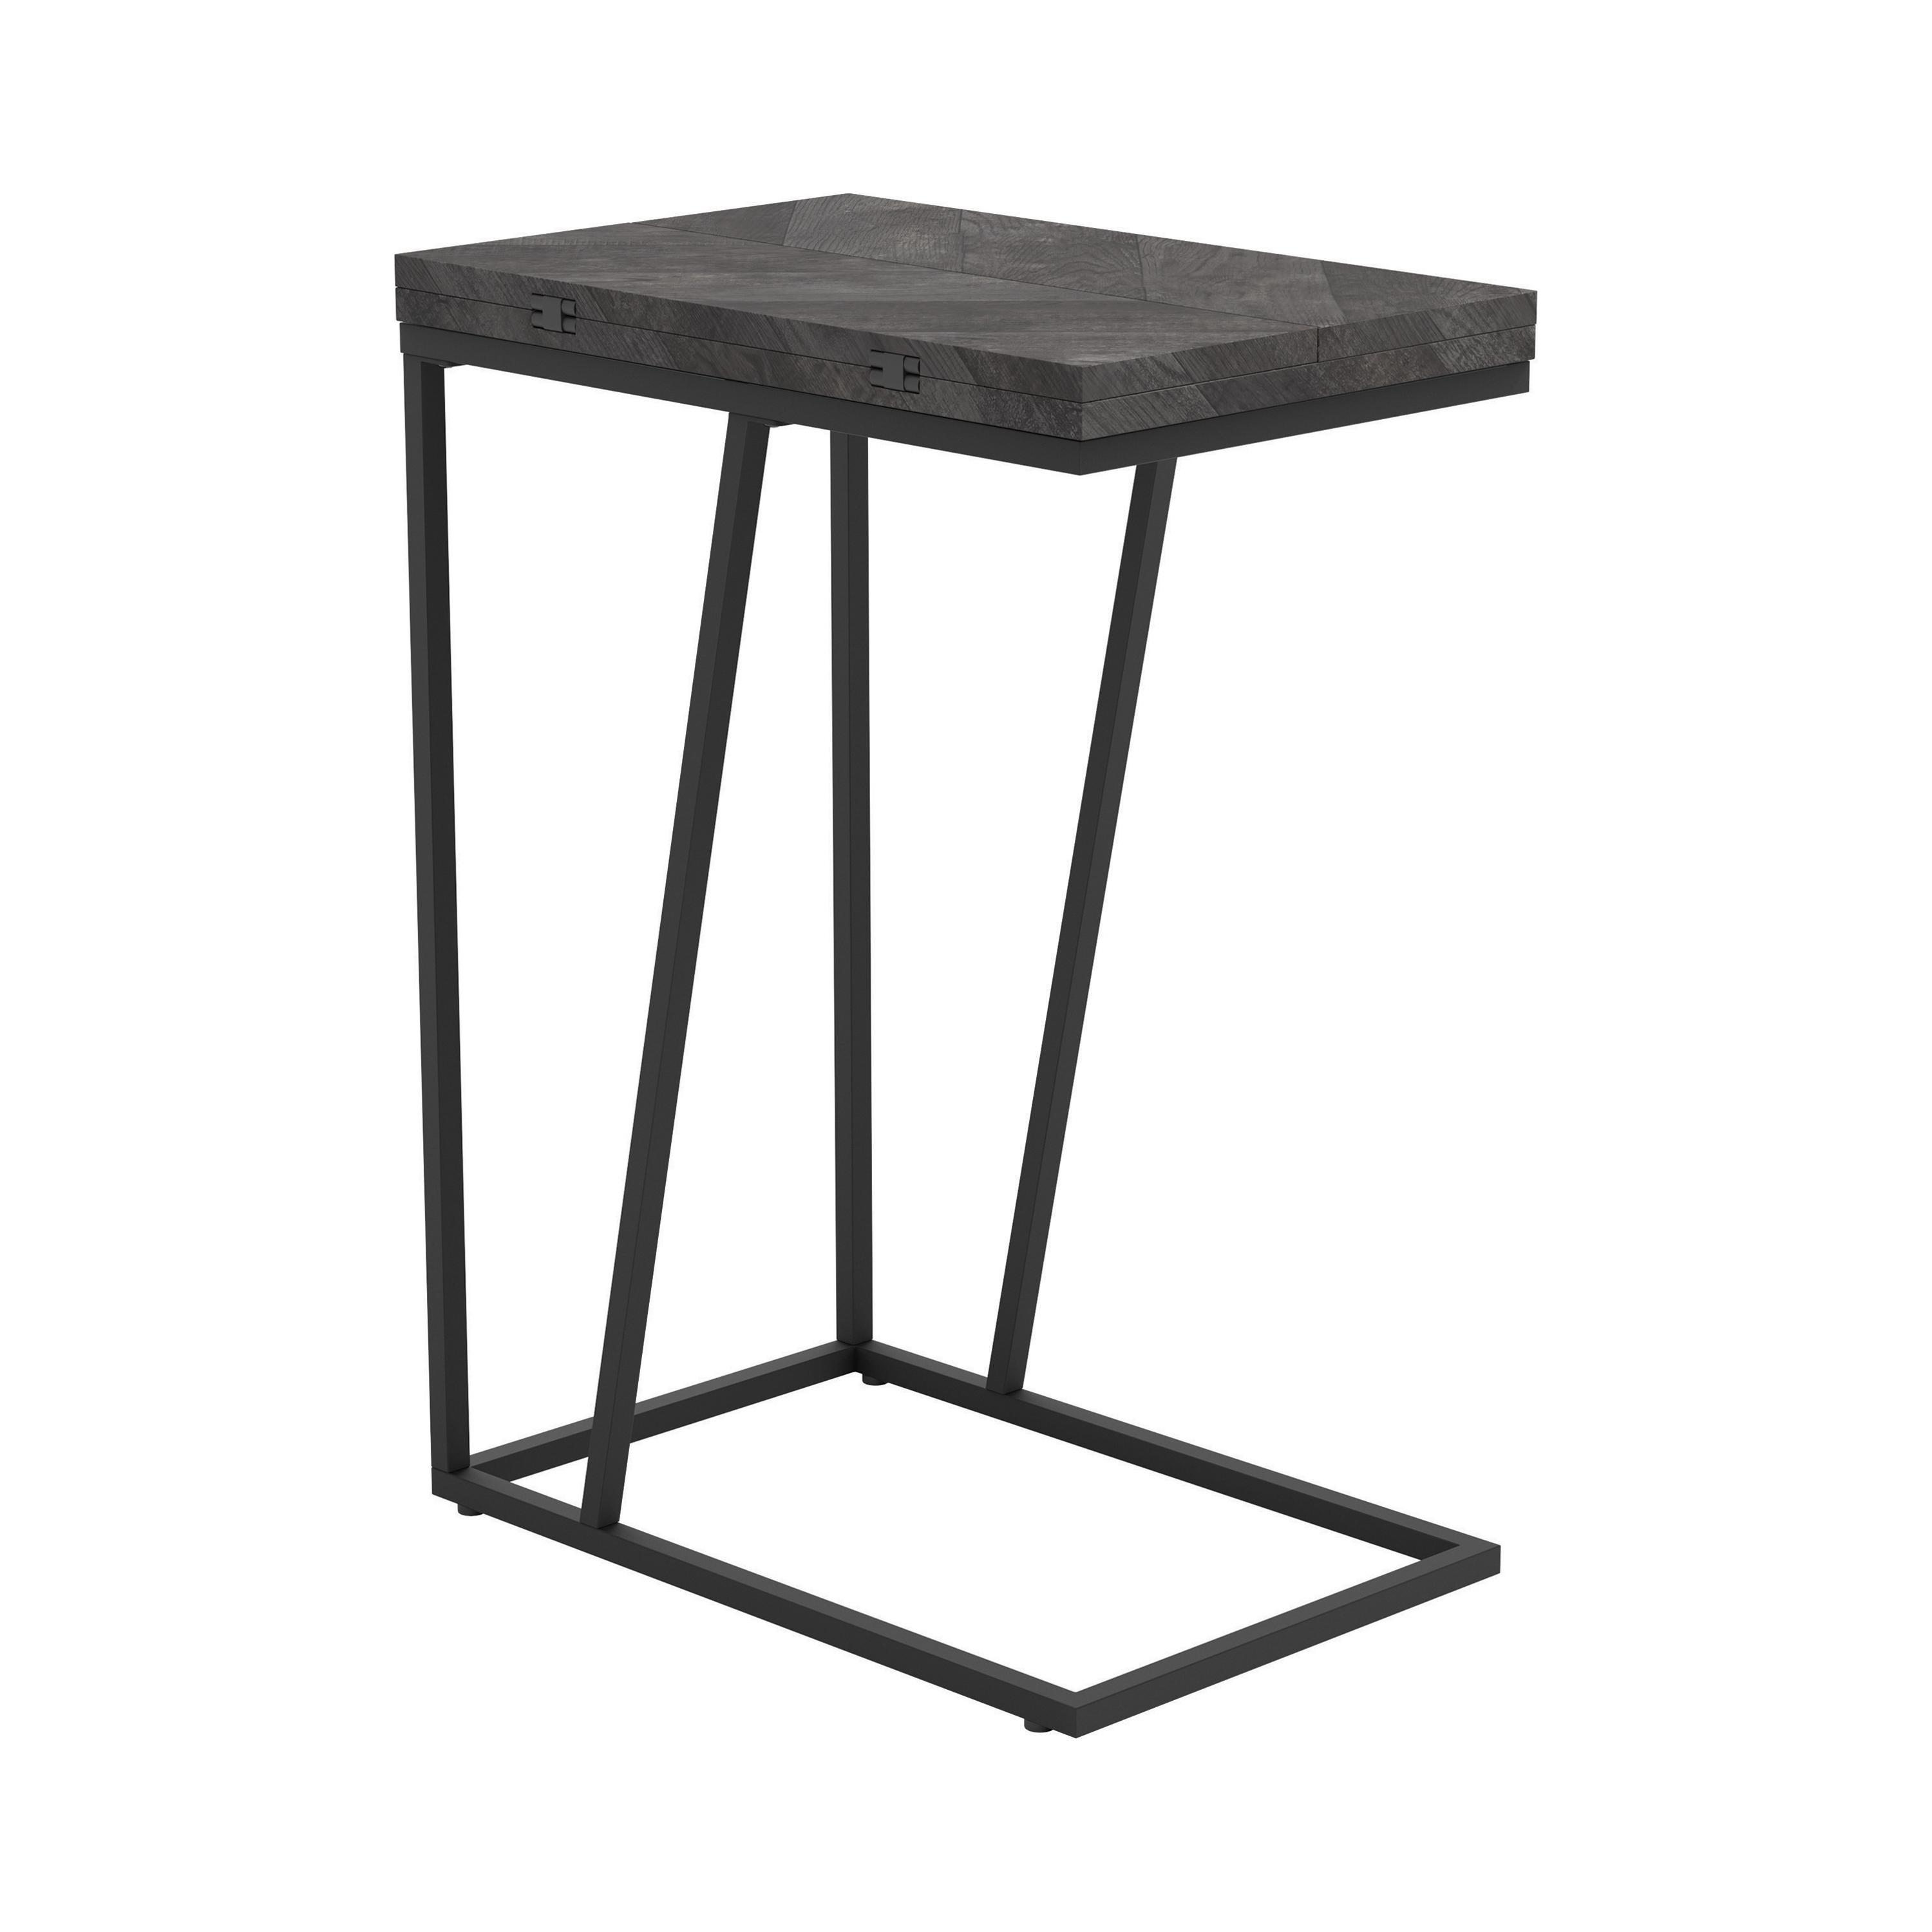 Modern Accent Table 931156 931156 in Gray 